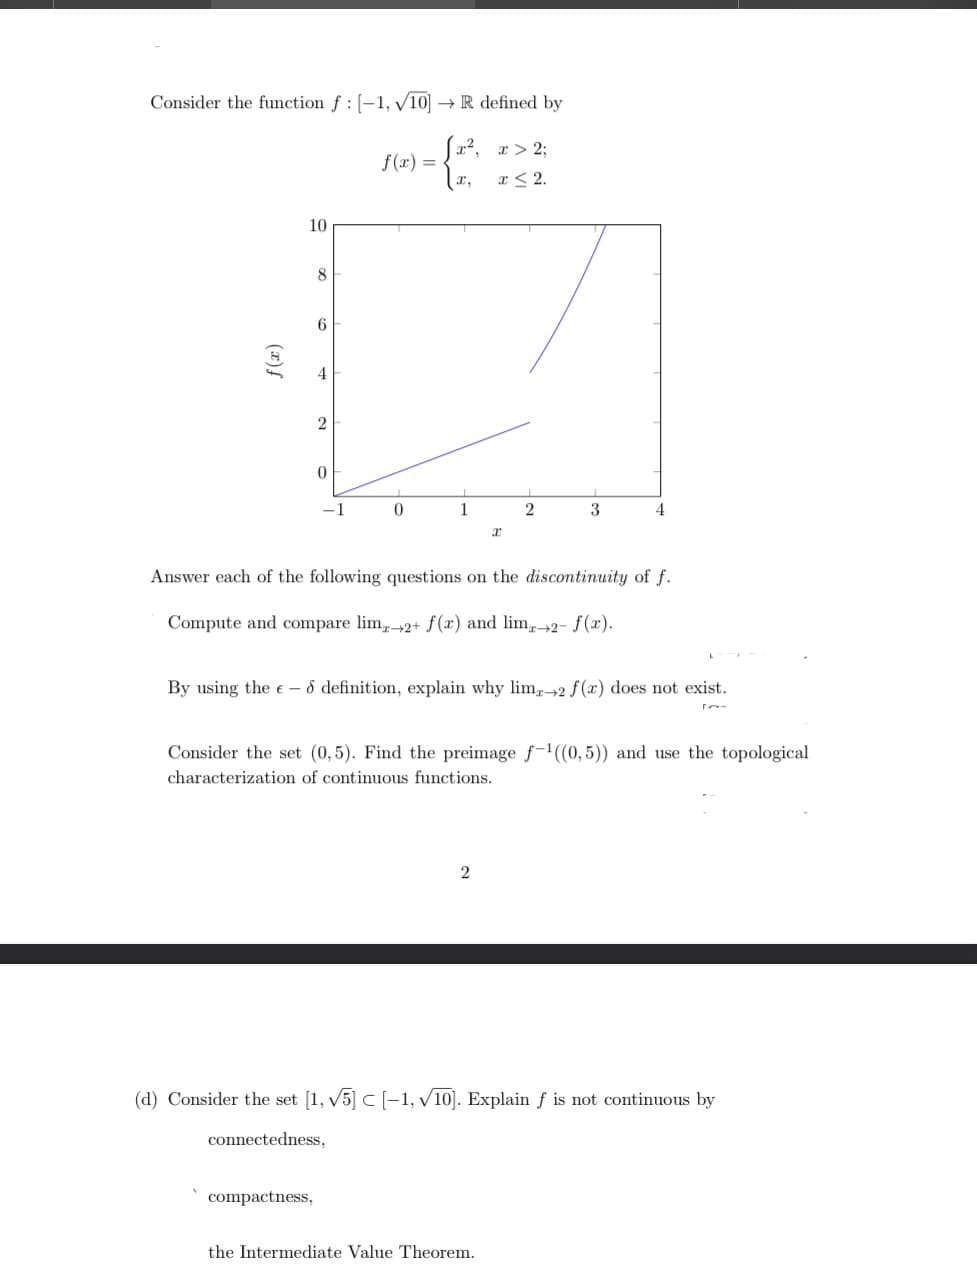 Consider the function f : [-1, √10] → R defined by
-G
I,
f(x)
10
8
6
4
2
compactness,
0
f(x) =
0
[x², x > 2;
x ≤ 2.
1
x
Answer each of the following questions on the discontinuity of f.
Compute and compare lim 2+ f(x) and lim-2- f(x).
2
By using the ed definition, explain why lime-2 f(x) does not exist.
2
3
Consider the set (0,5). Find the preimage f-¹((0,5)) and use the topological
characterization of continuous functions.
the Intermediate Value Theorem.
(d) Consider the set [1, √5] C [-1, √10]. Explain f is not continuous by
connectedness,